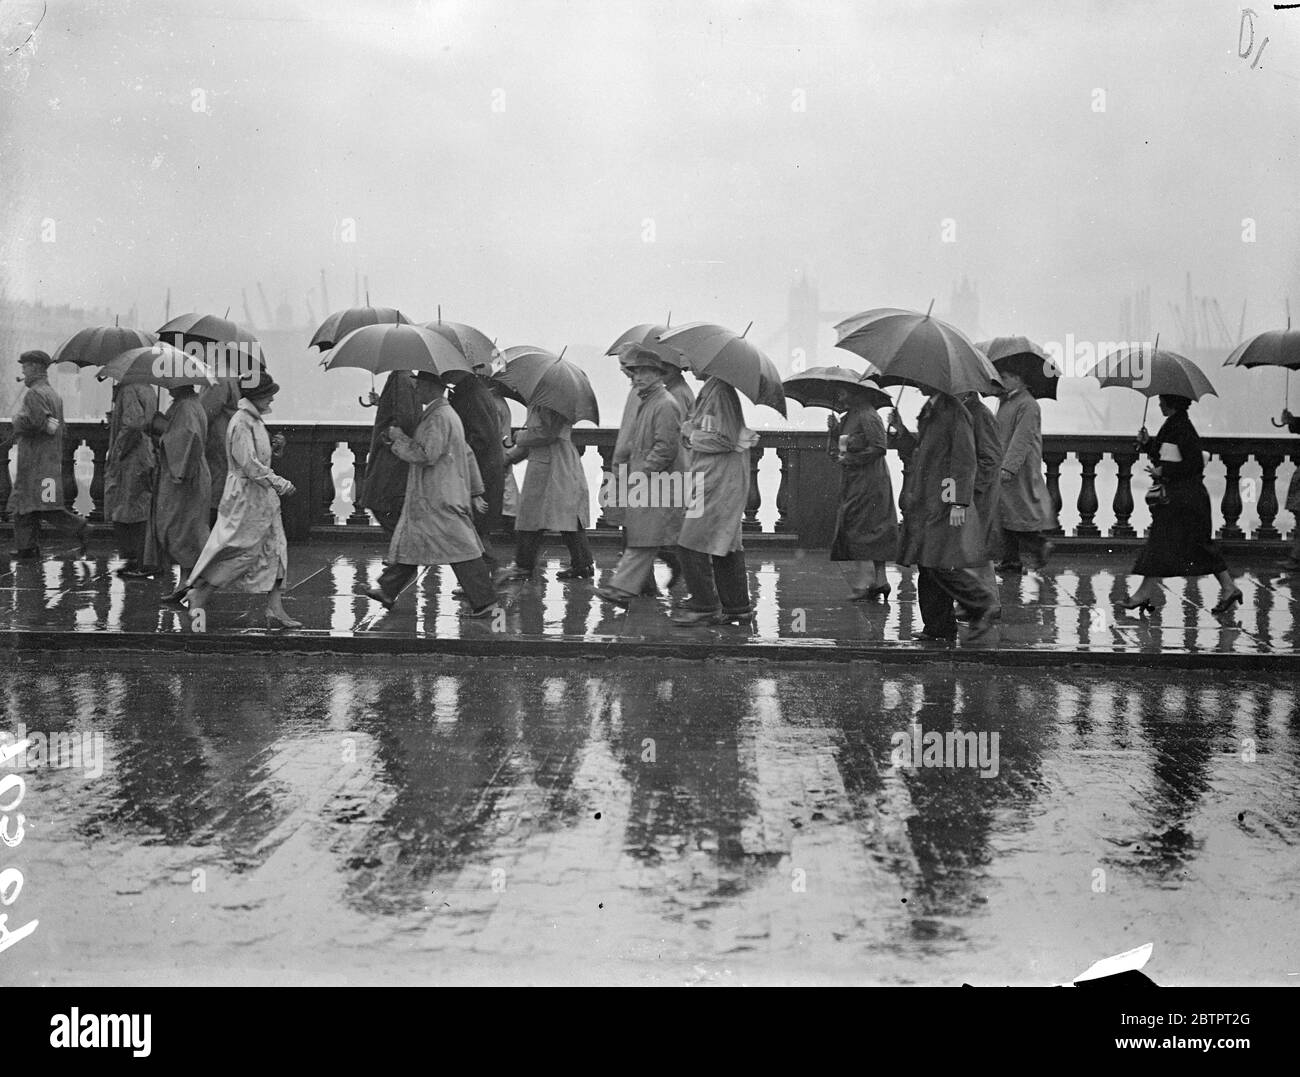 London's Saturday downpour. The driest October 9 in Britain for six years, seems now to have changed its mind, and London has been drenched by torrential rains, the heaviest for many months. Photo shows, pedestrians, carrying over London Bridge under umbrellas. 23 October 1937 Stock Photo